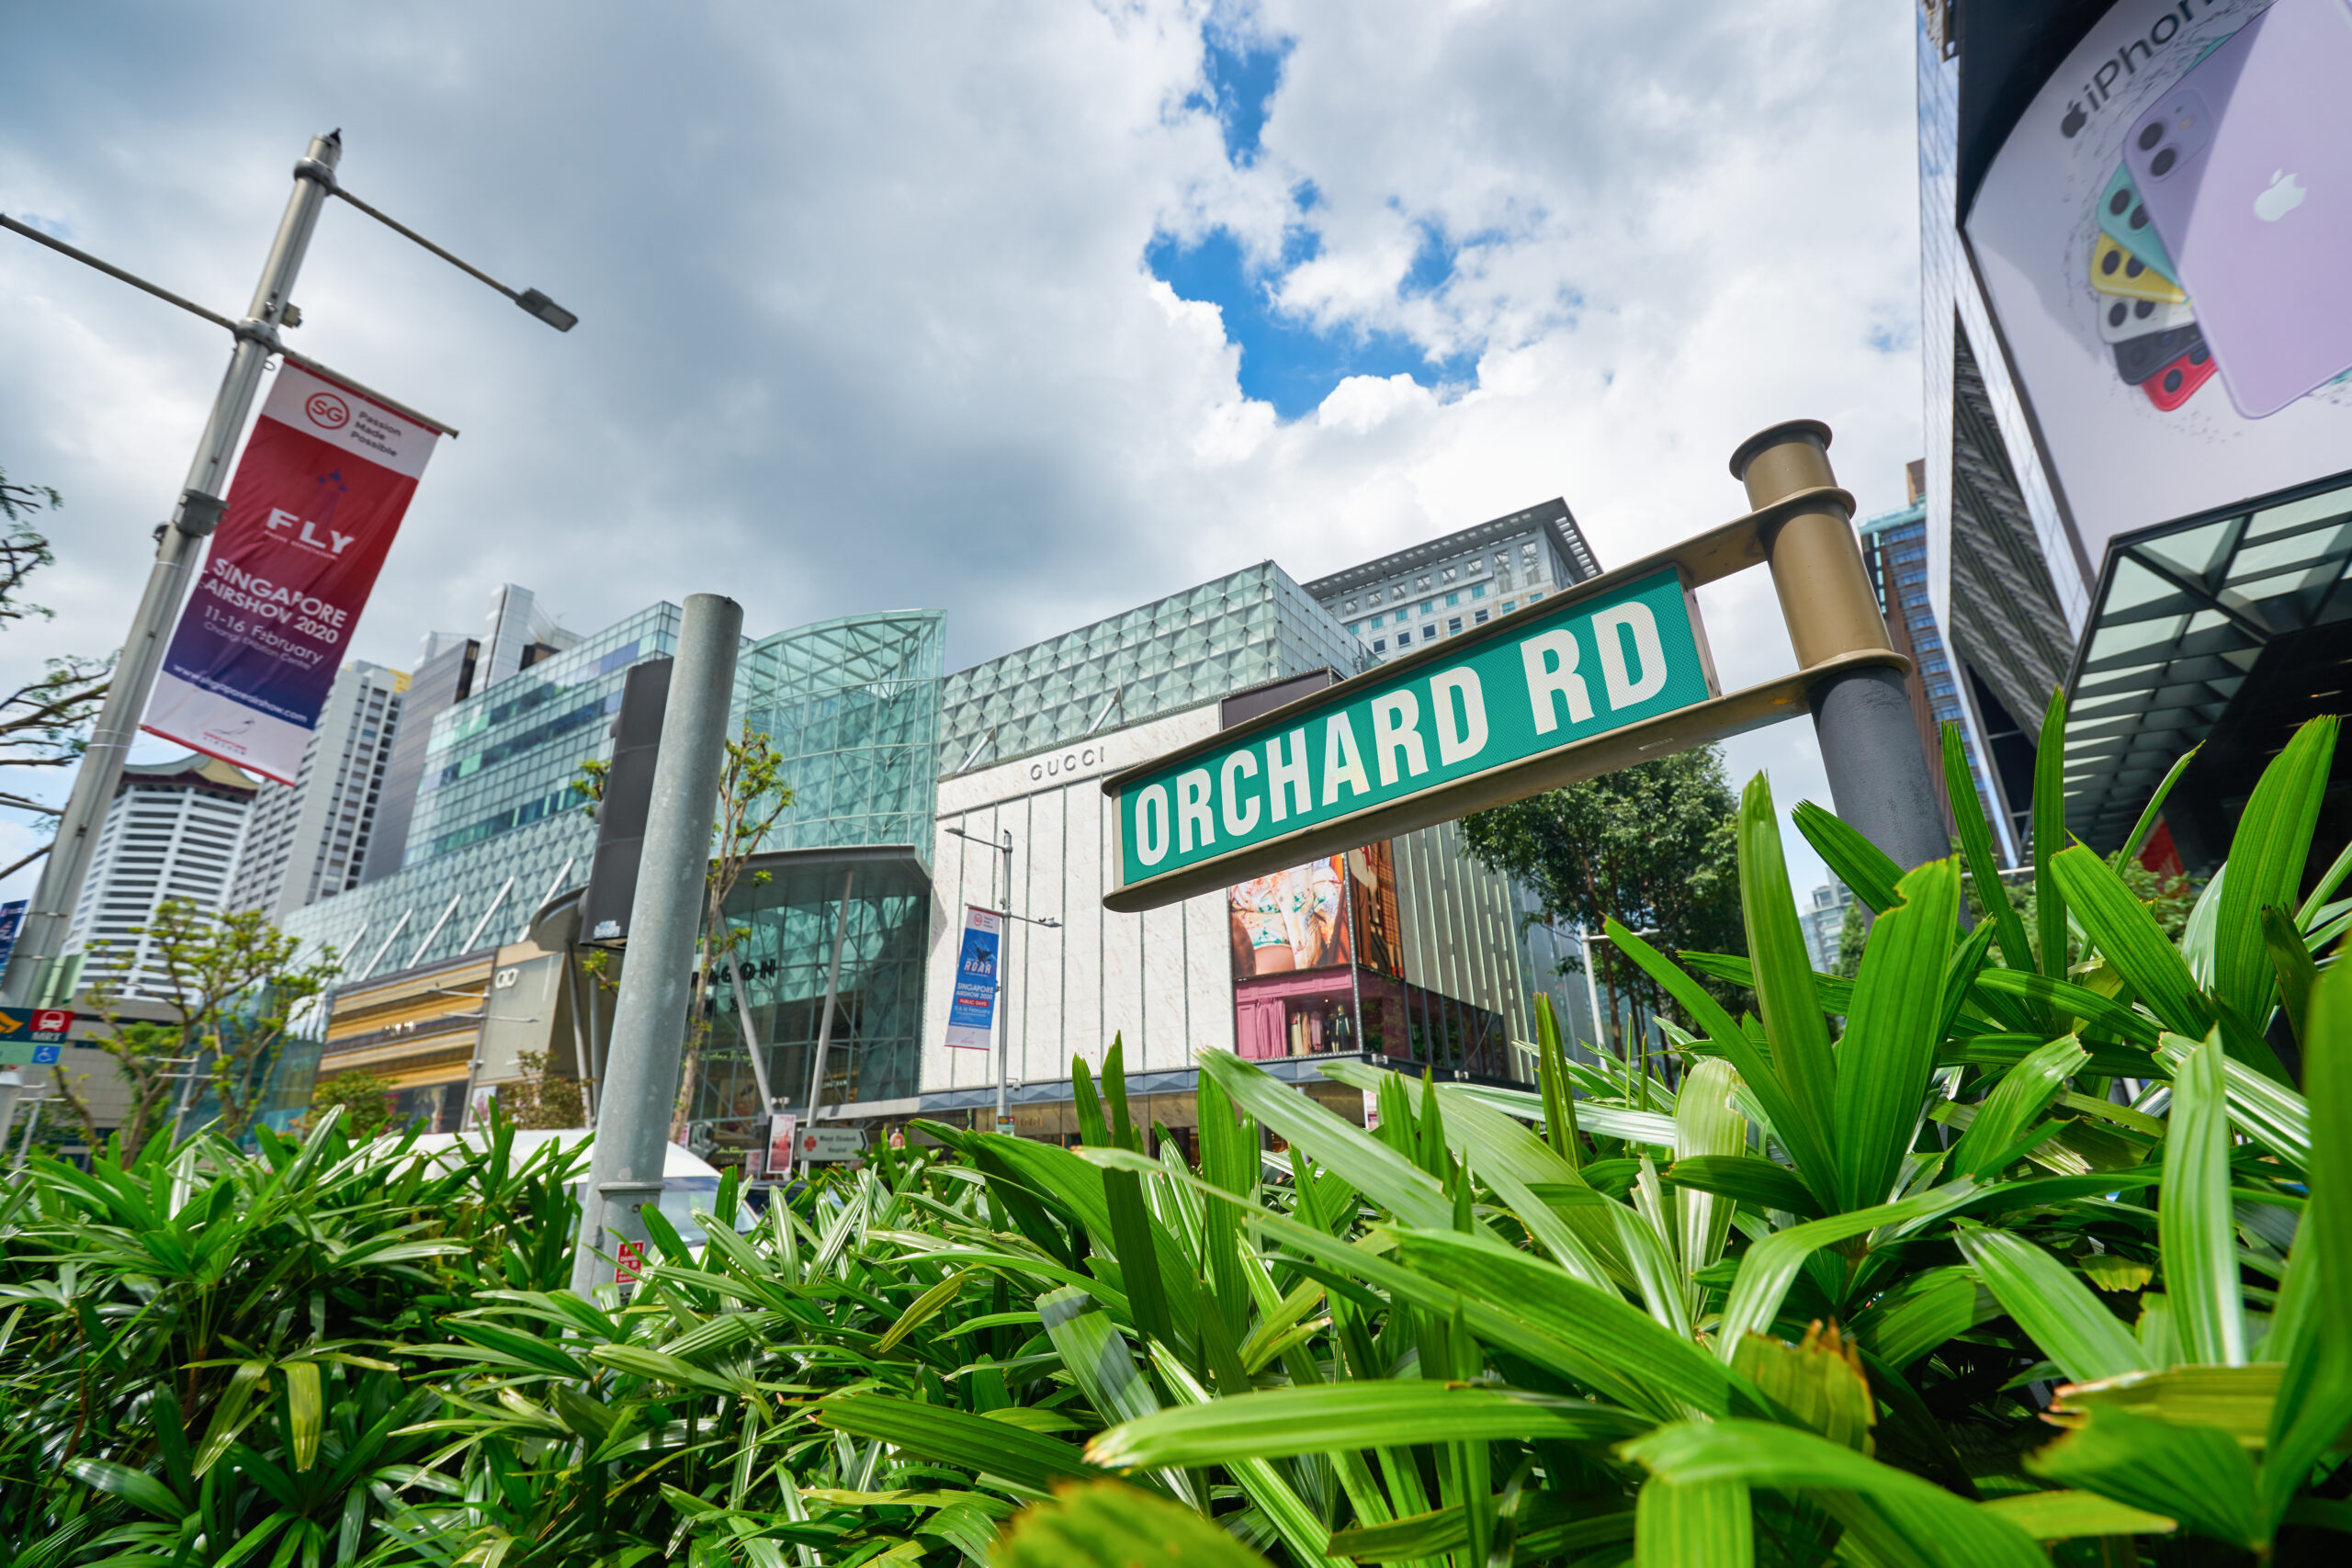 A close up shot of the Orchard Road sign and plants along the sidewalk